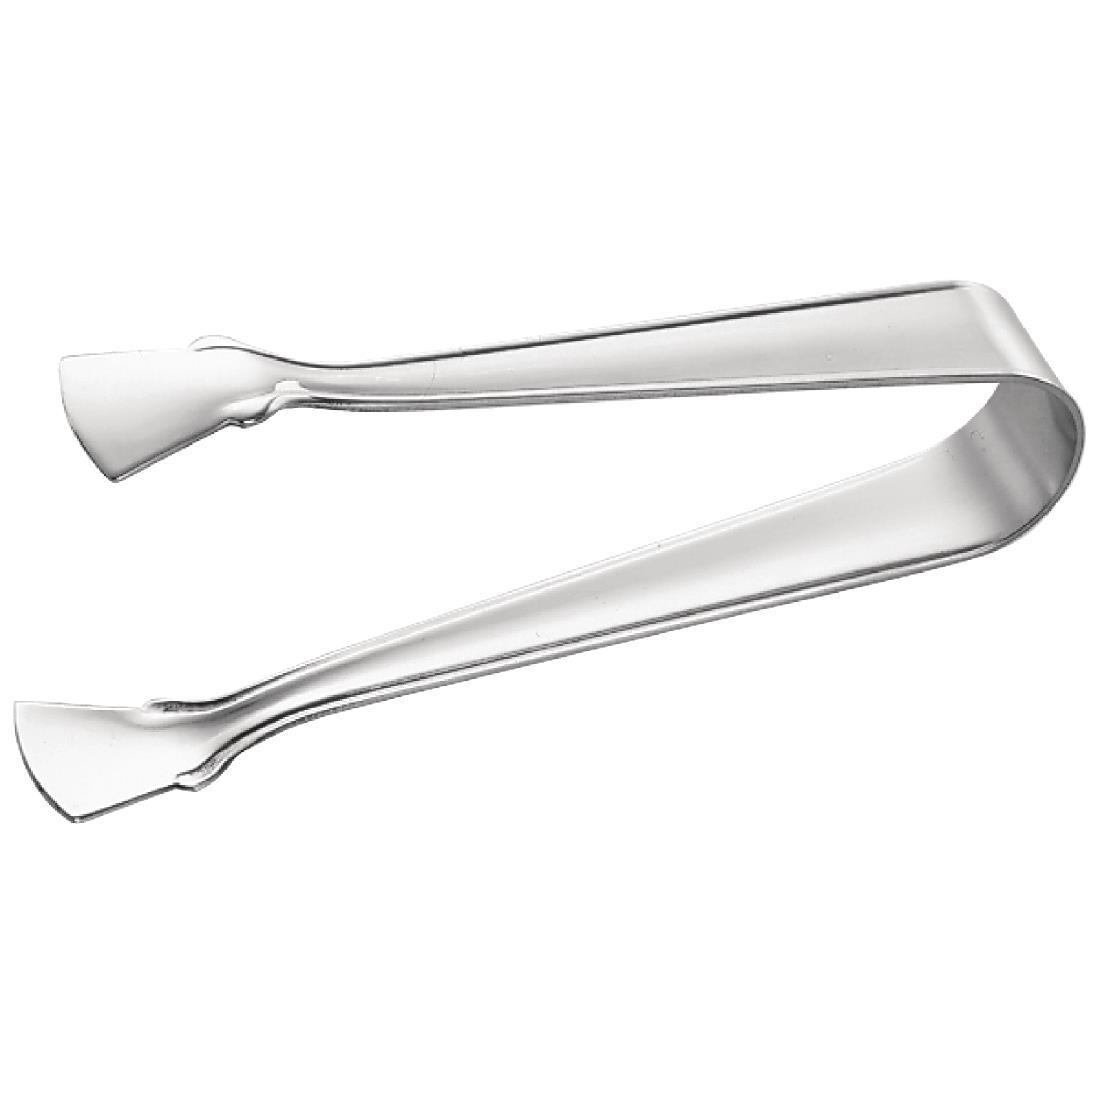 Olympia Stainless Steel Sugar Tongs 105mm - CR563  - 1